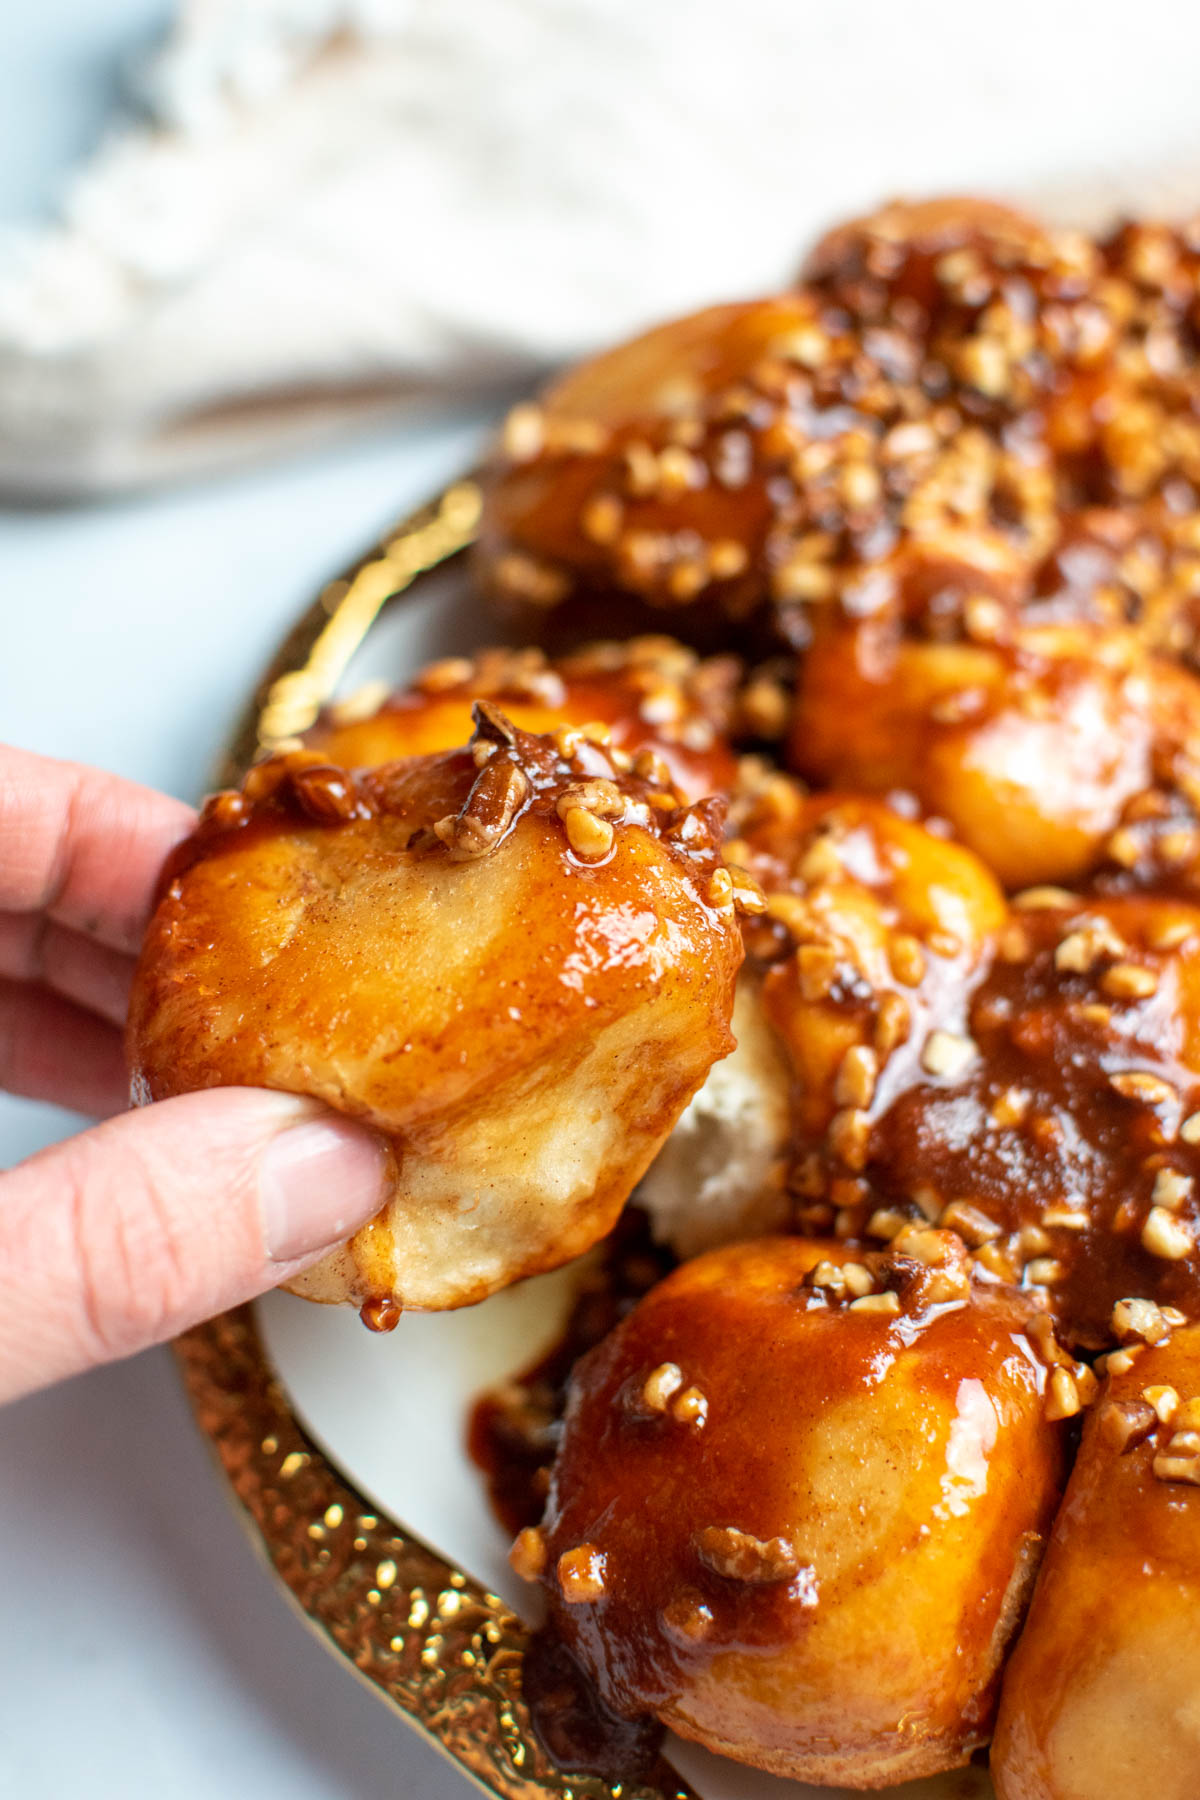 Hand pulls sticky bun with pecans away from other sticky buns on gold plate.